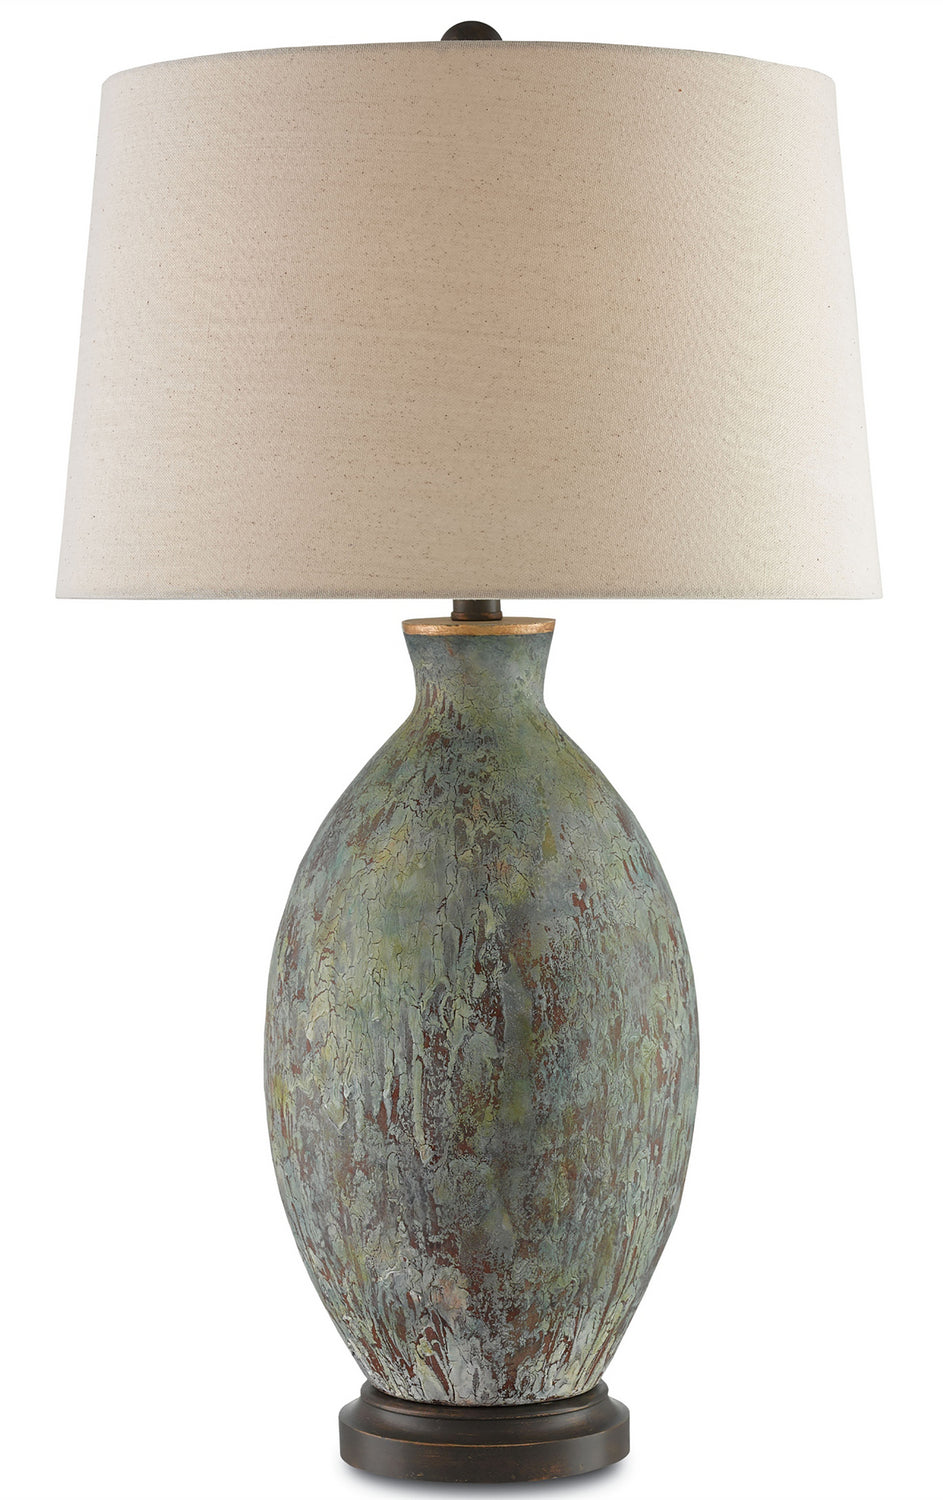 Remi 1 Light Table Lamp in Green & Dark Red & Bronze Gold with Flax Linen Shade